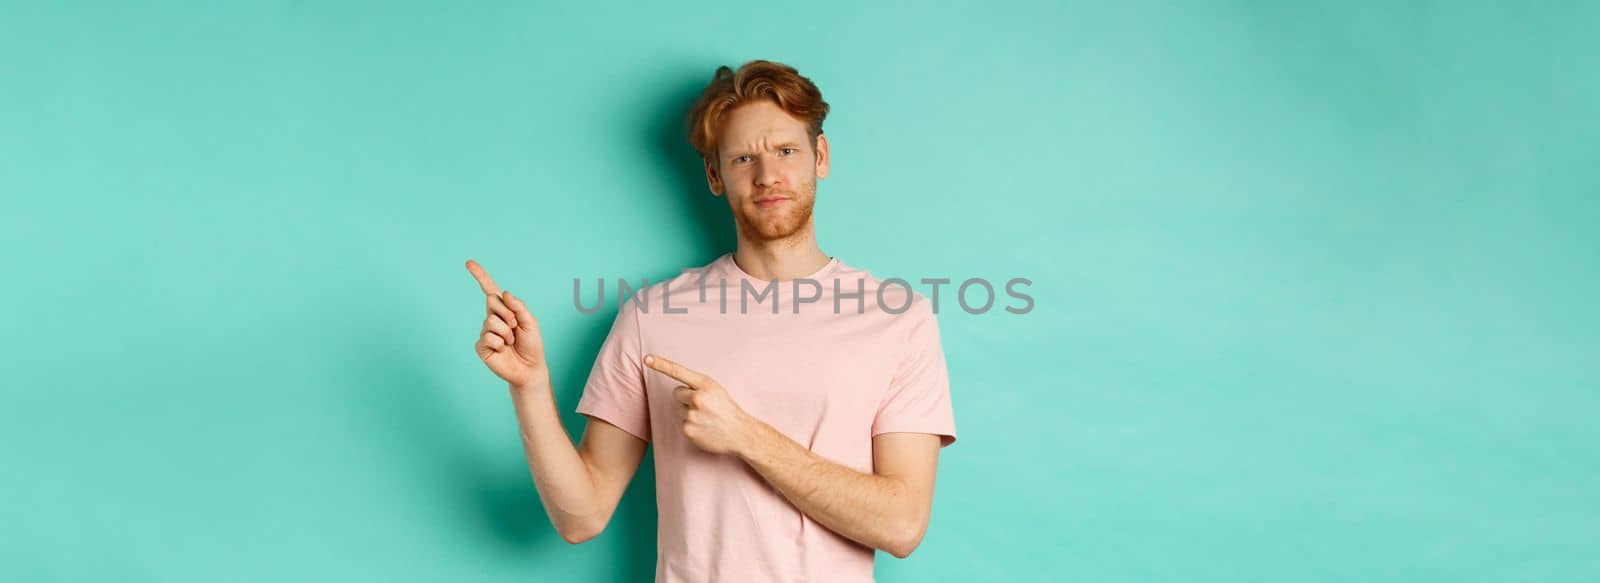 Skeptical and doubtful redhead man in t-shirt pointing fingers at upper right corner, showing promo offer with displeased face, standing over turquoise background.